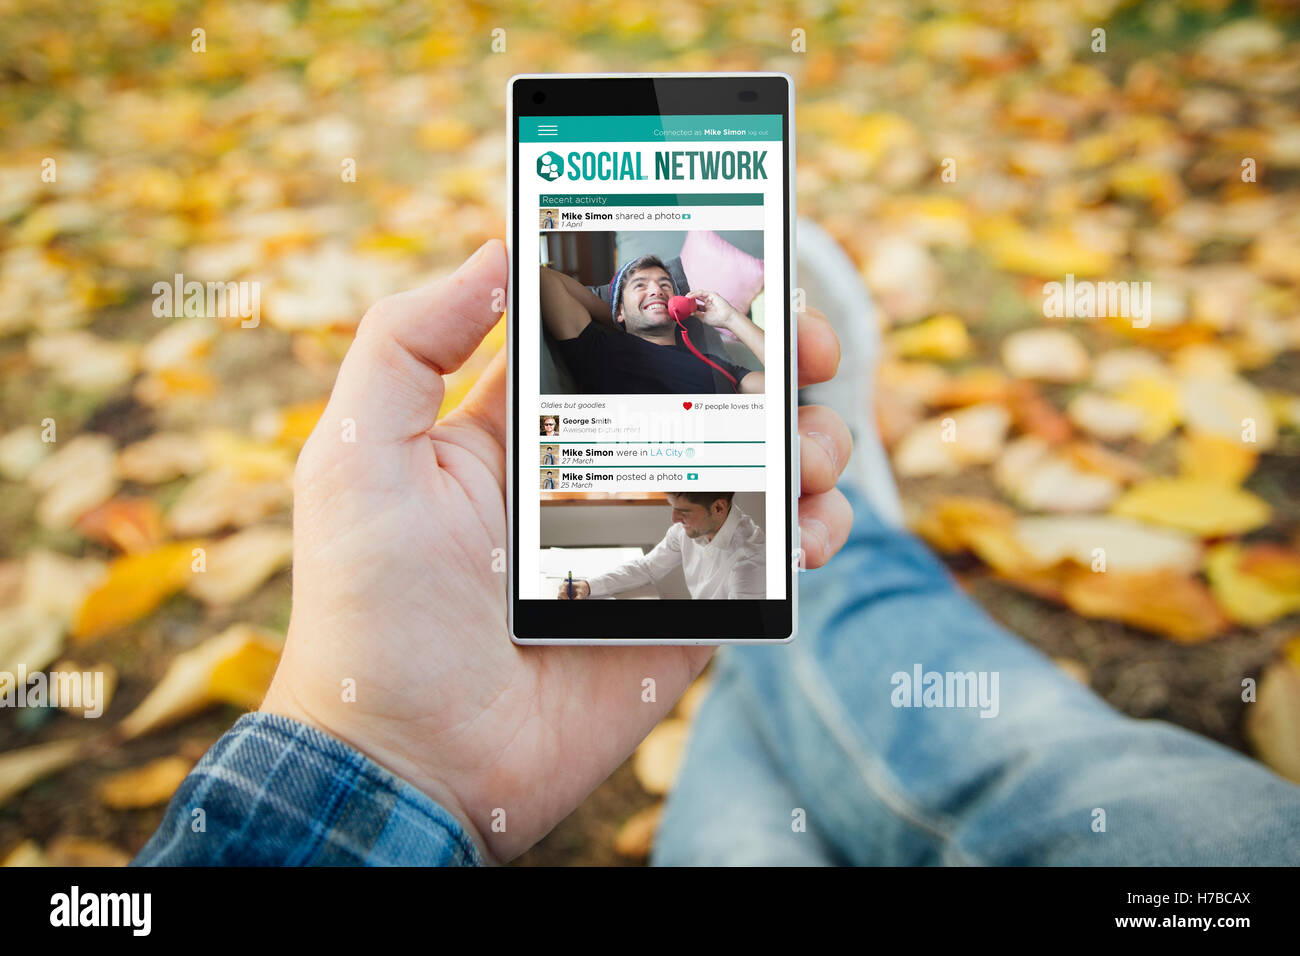 man in the park with social network smartphone. All screen graphics are made up. Stock Photo